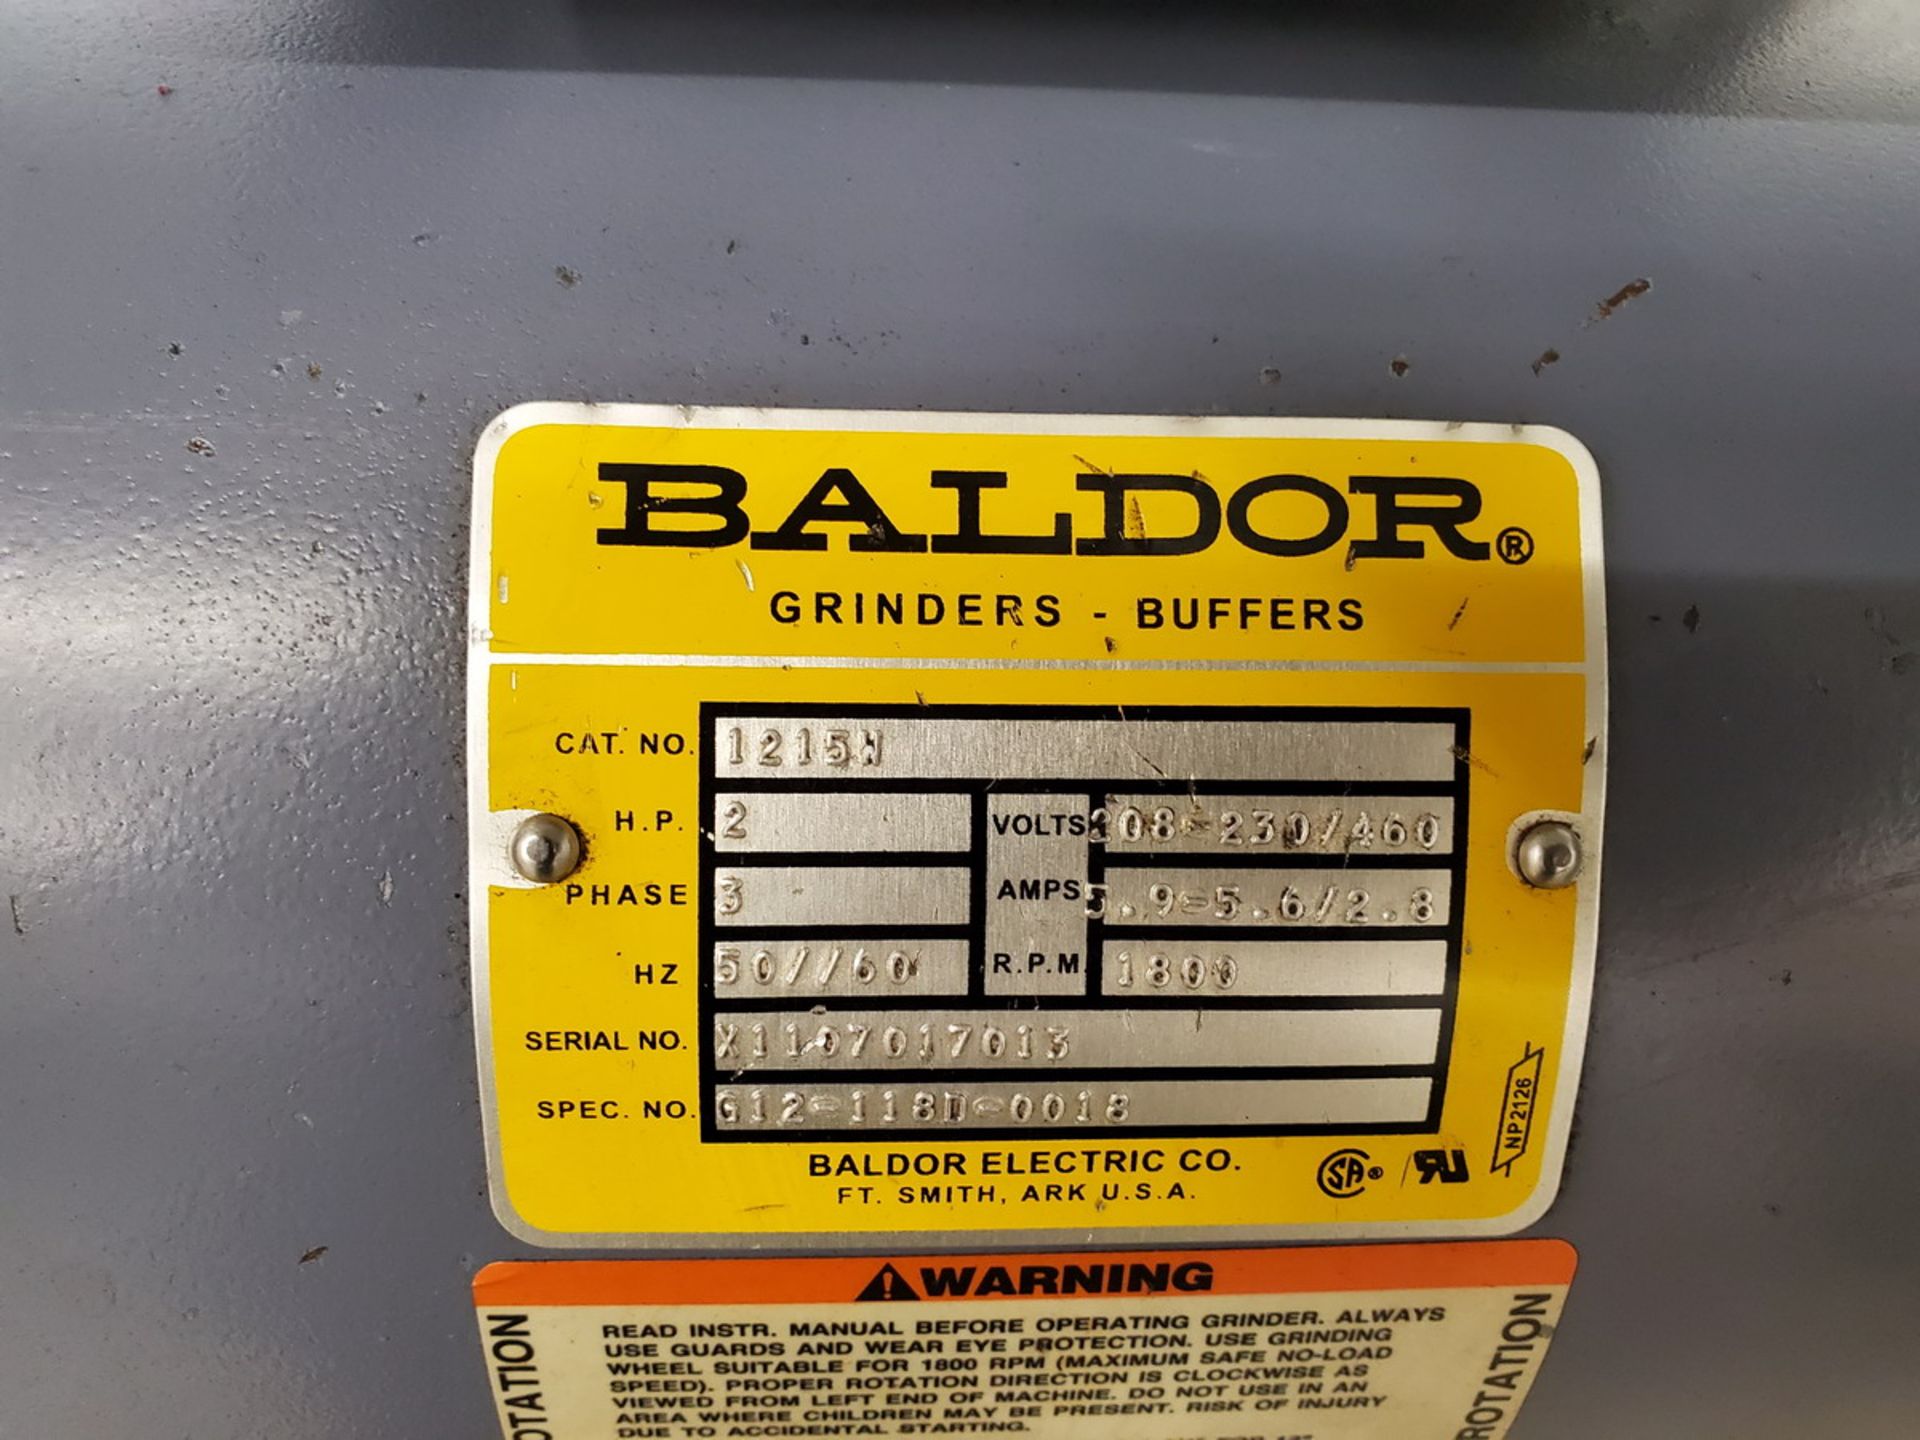 Baldor 12" Grinder 2HP, 208-230/460V, 3pH, 50/60HZ, 1800RPM; W/ (2) 1-7/8" Wrenches - Image 6 of 6